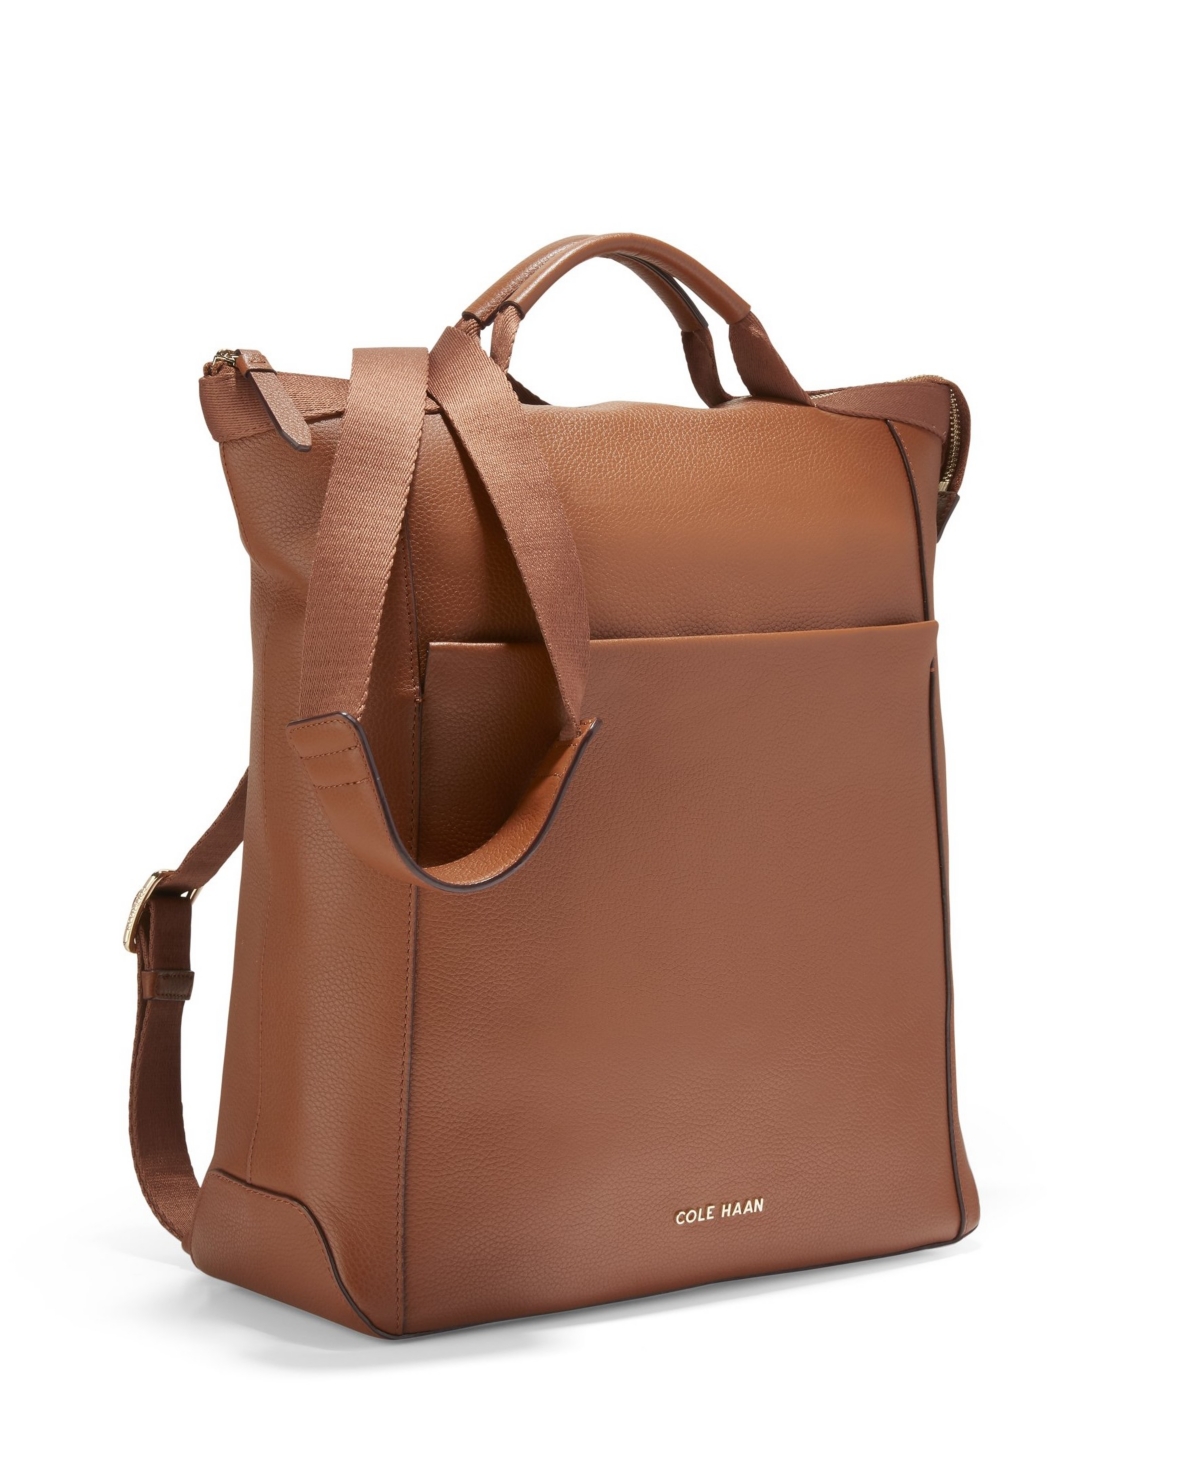 COLE HAAN LEATHER CONVERTIBLE BACKPACK